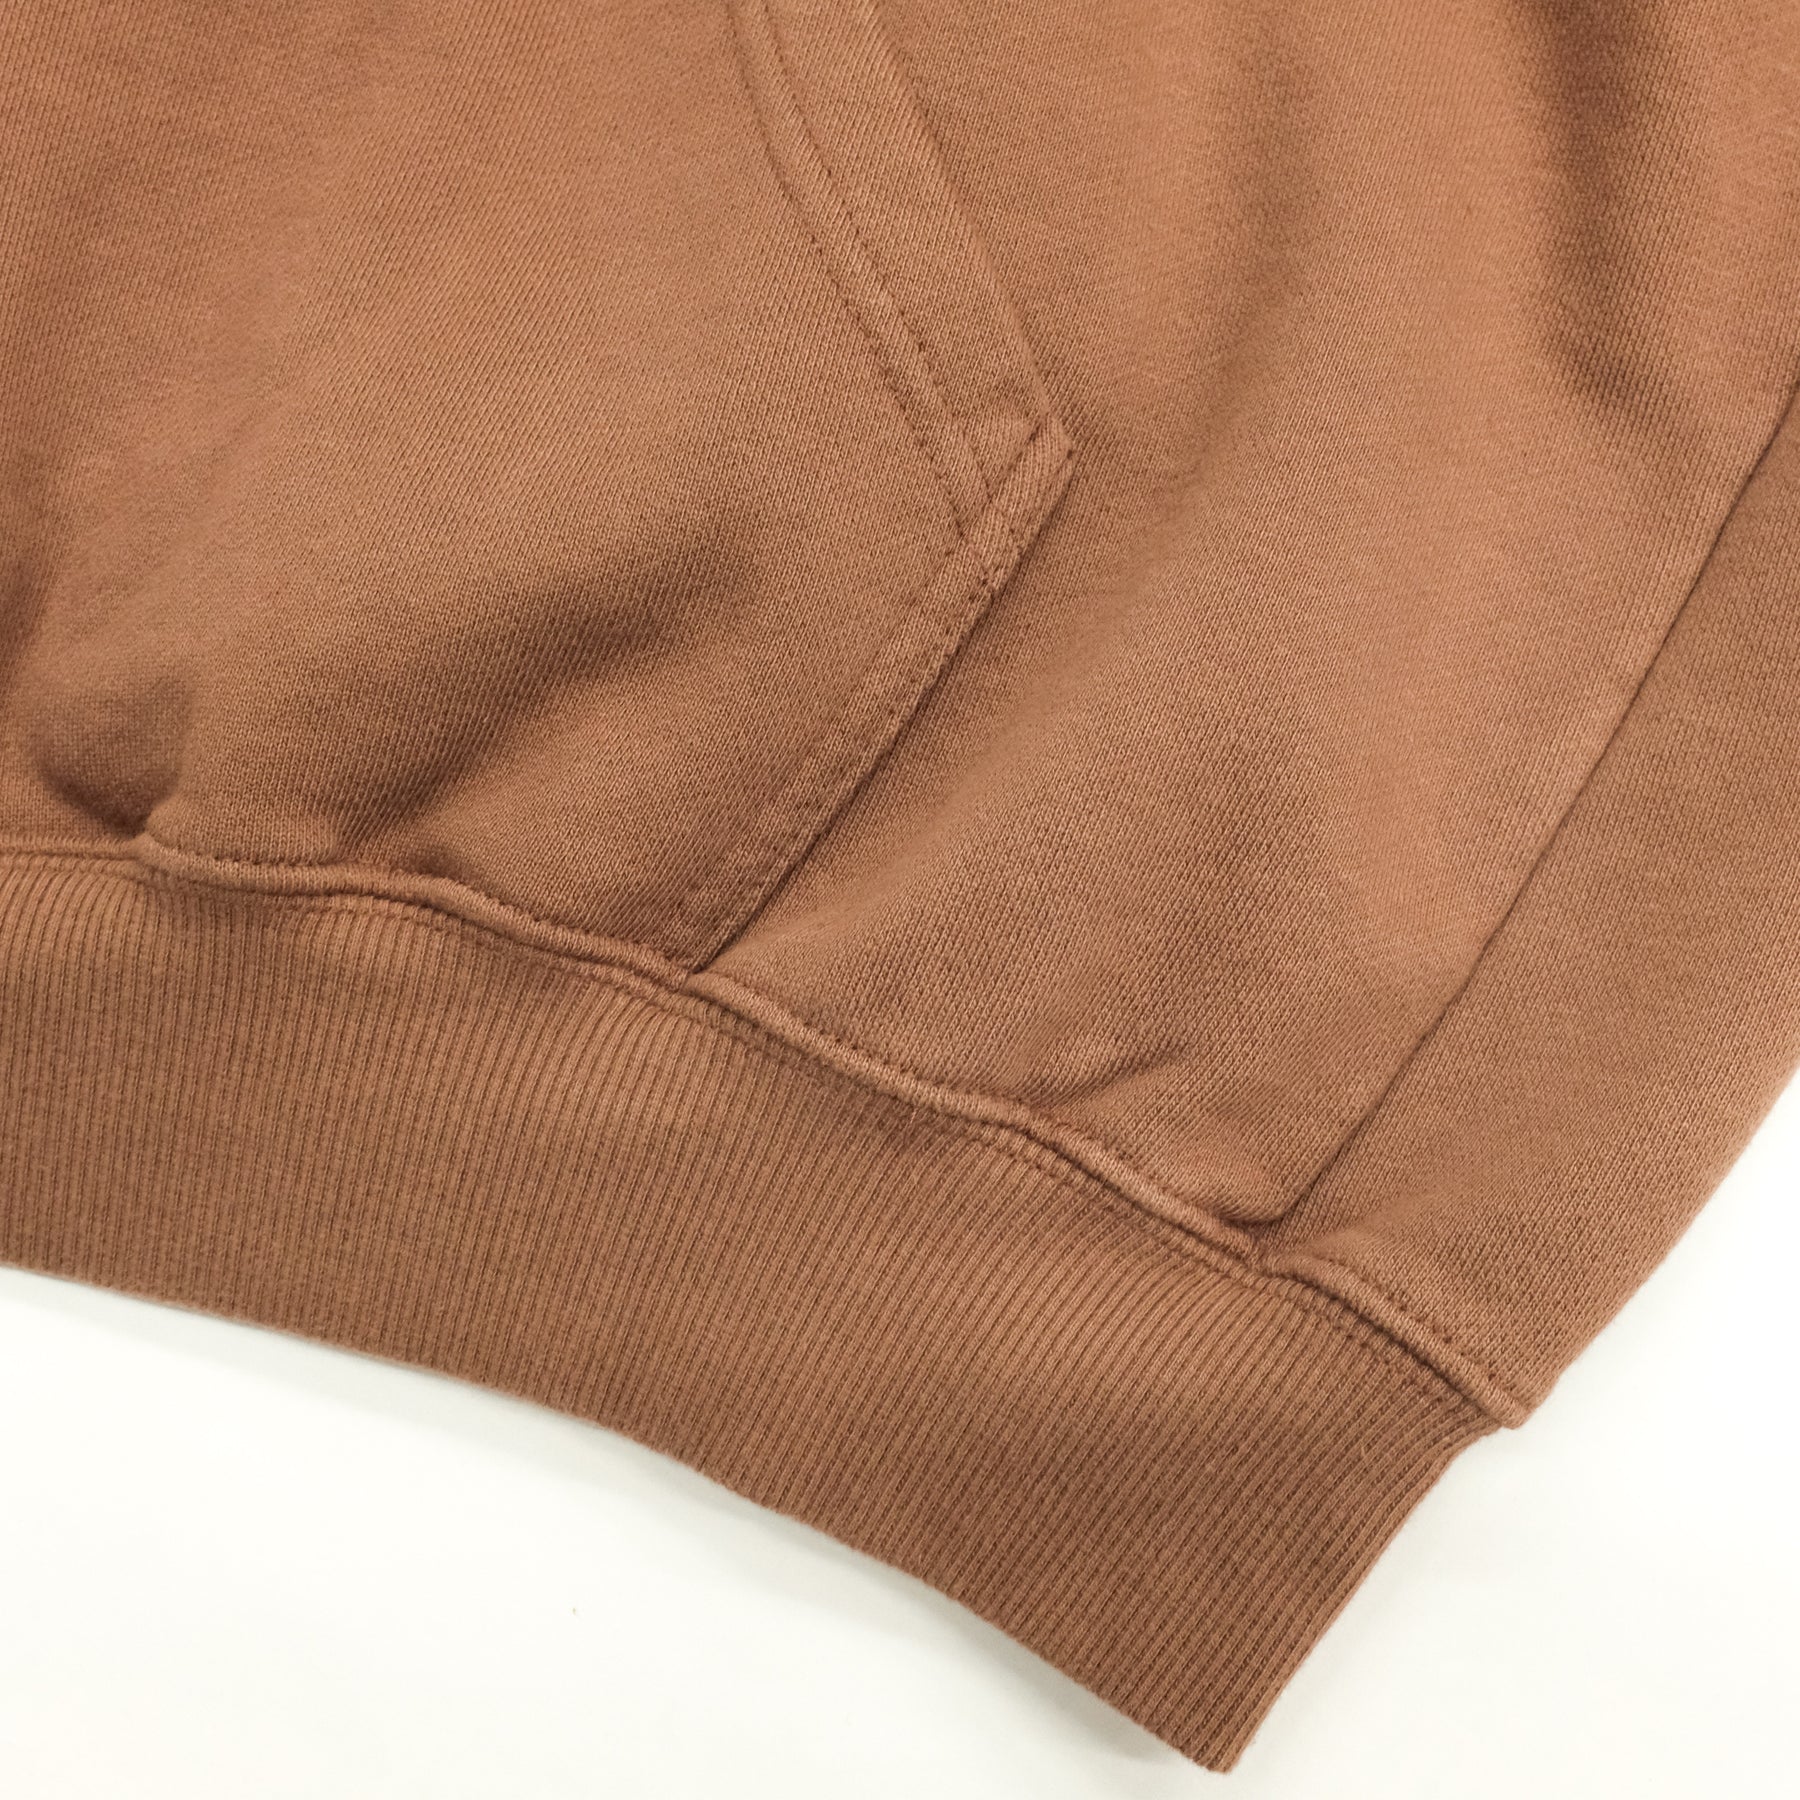 ARNOLD PARK STUDIOS / OIL AND FREIGHT LOGO HOODIE FADED BROWN